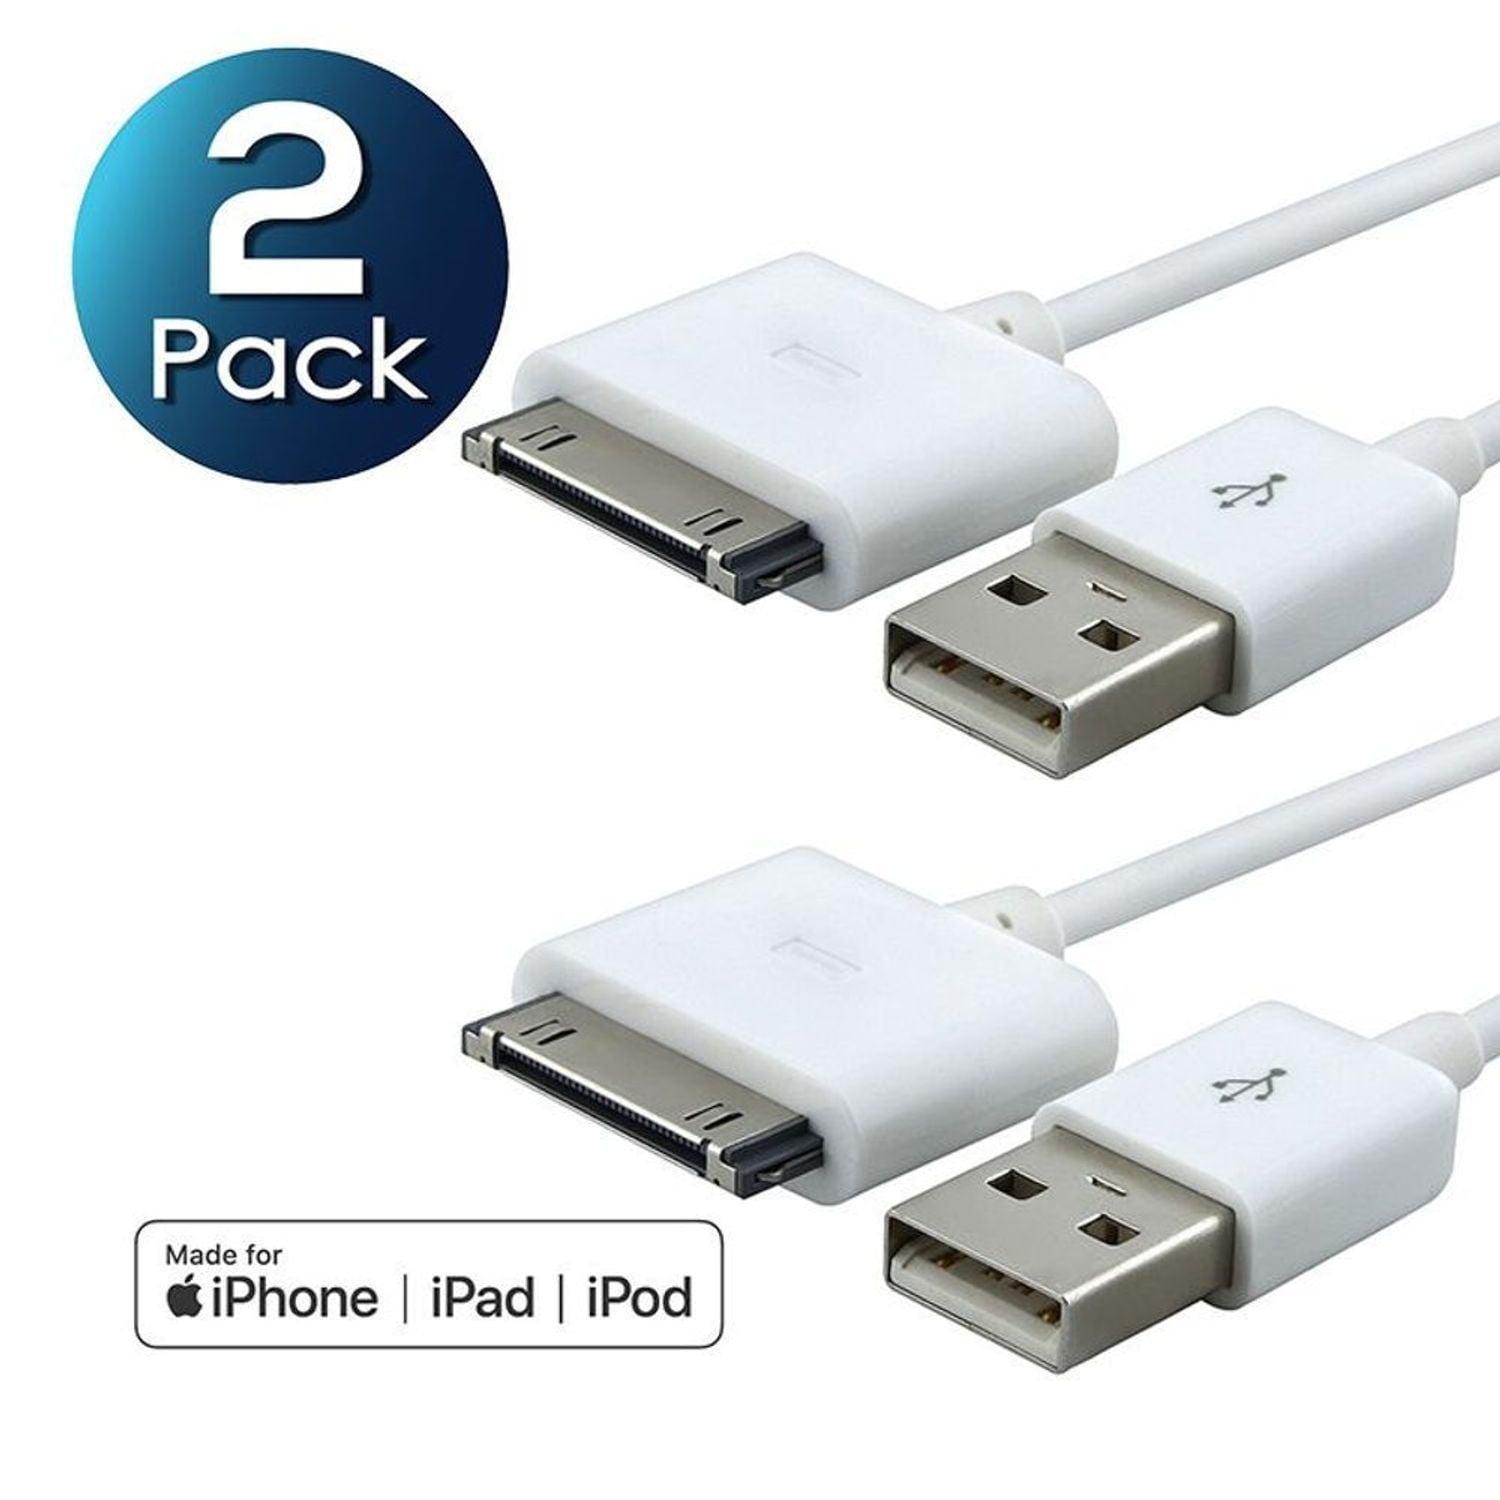 USB 2.0 Data Sync Charger Cable Cord For iPhone 3G/3GS/4/4S iPad 2 iPod Touch 